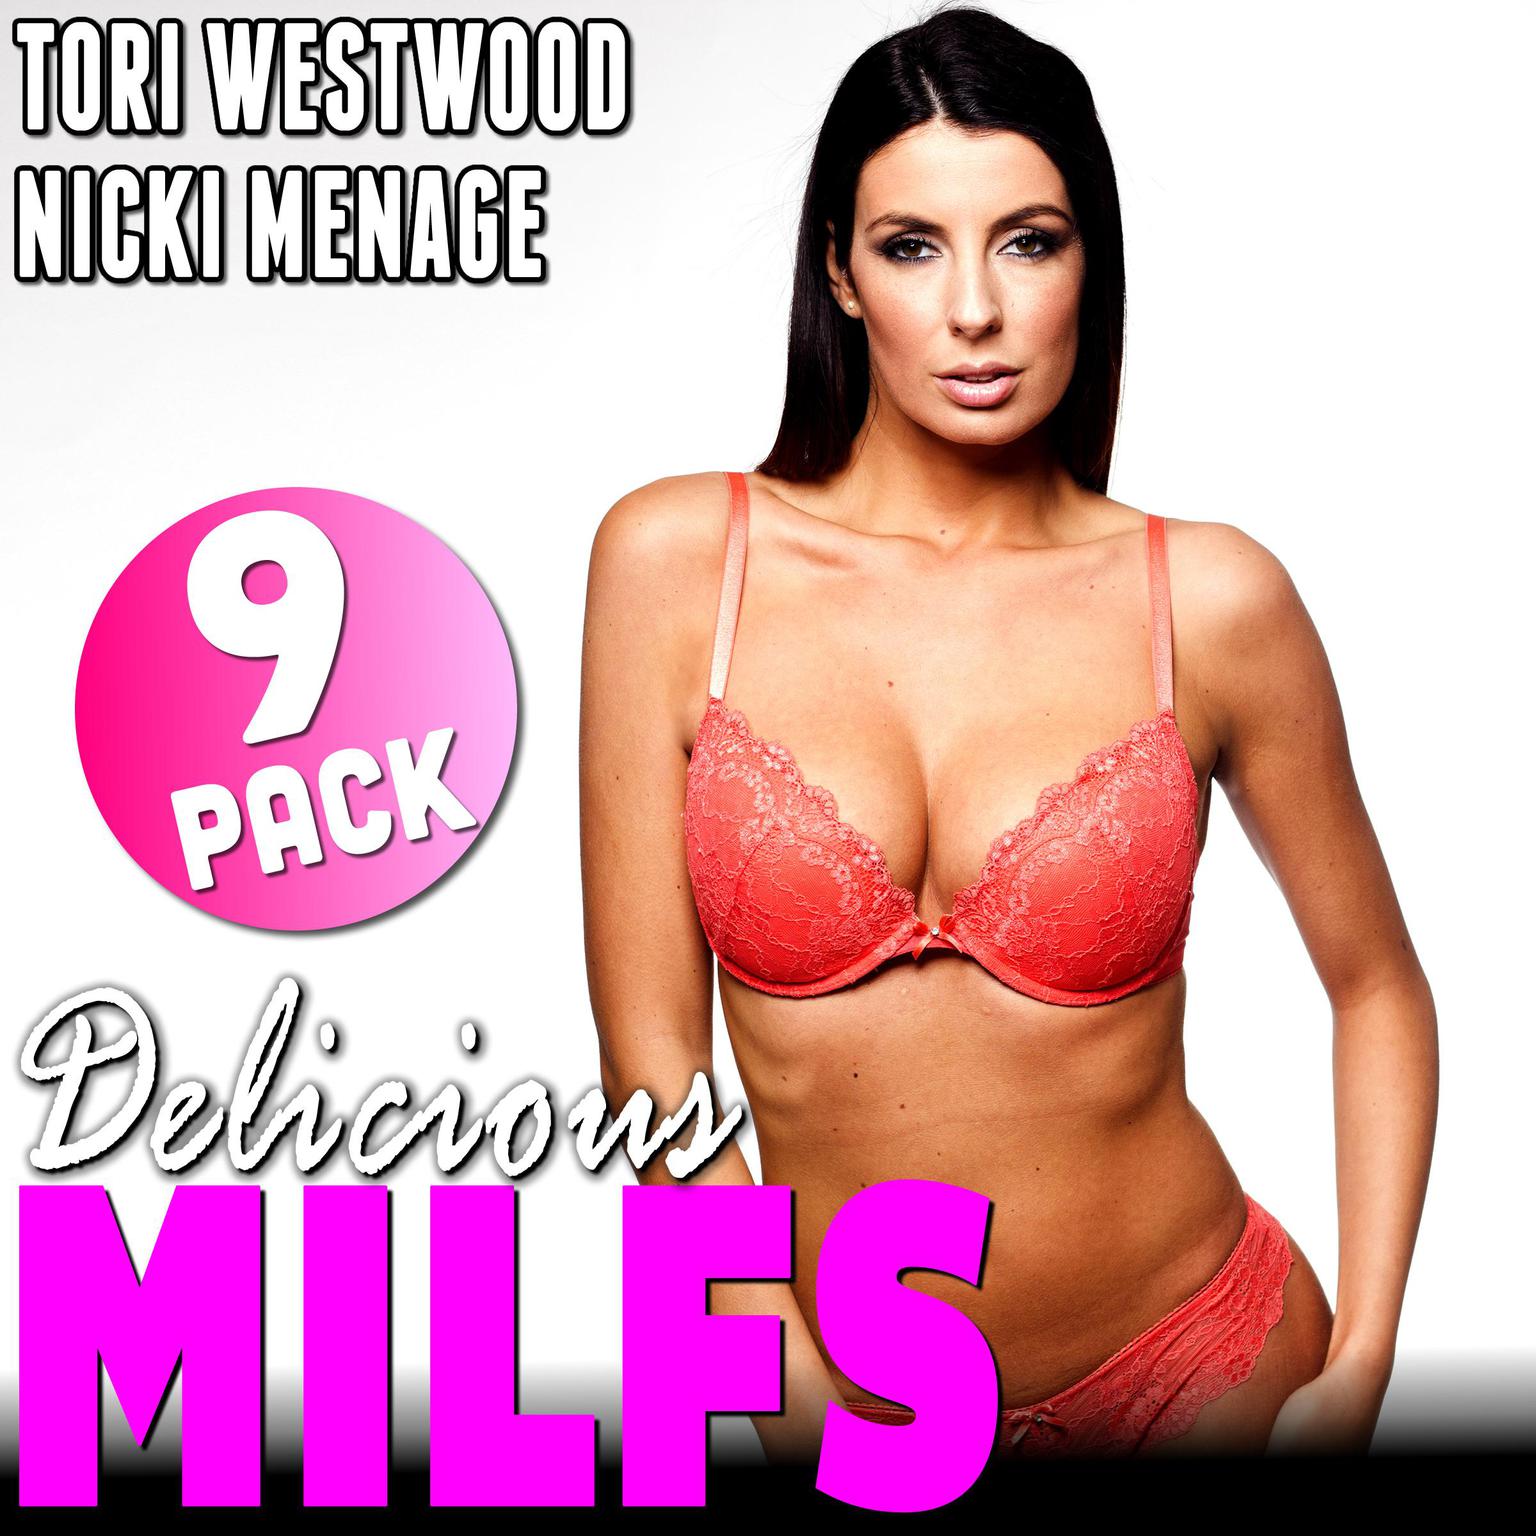 Delicious MILFs : MILF Erotica 9-Pack (Threesome Erotica Breeding Erotica Anal Sex Erotica MILF Erotica Collection) Audiobook, by Tori Westwood